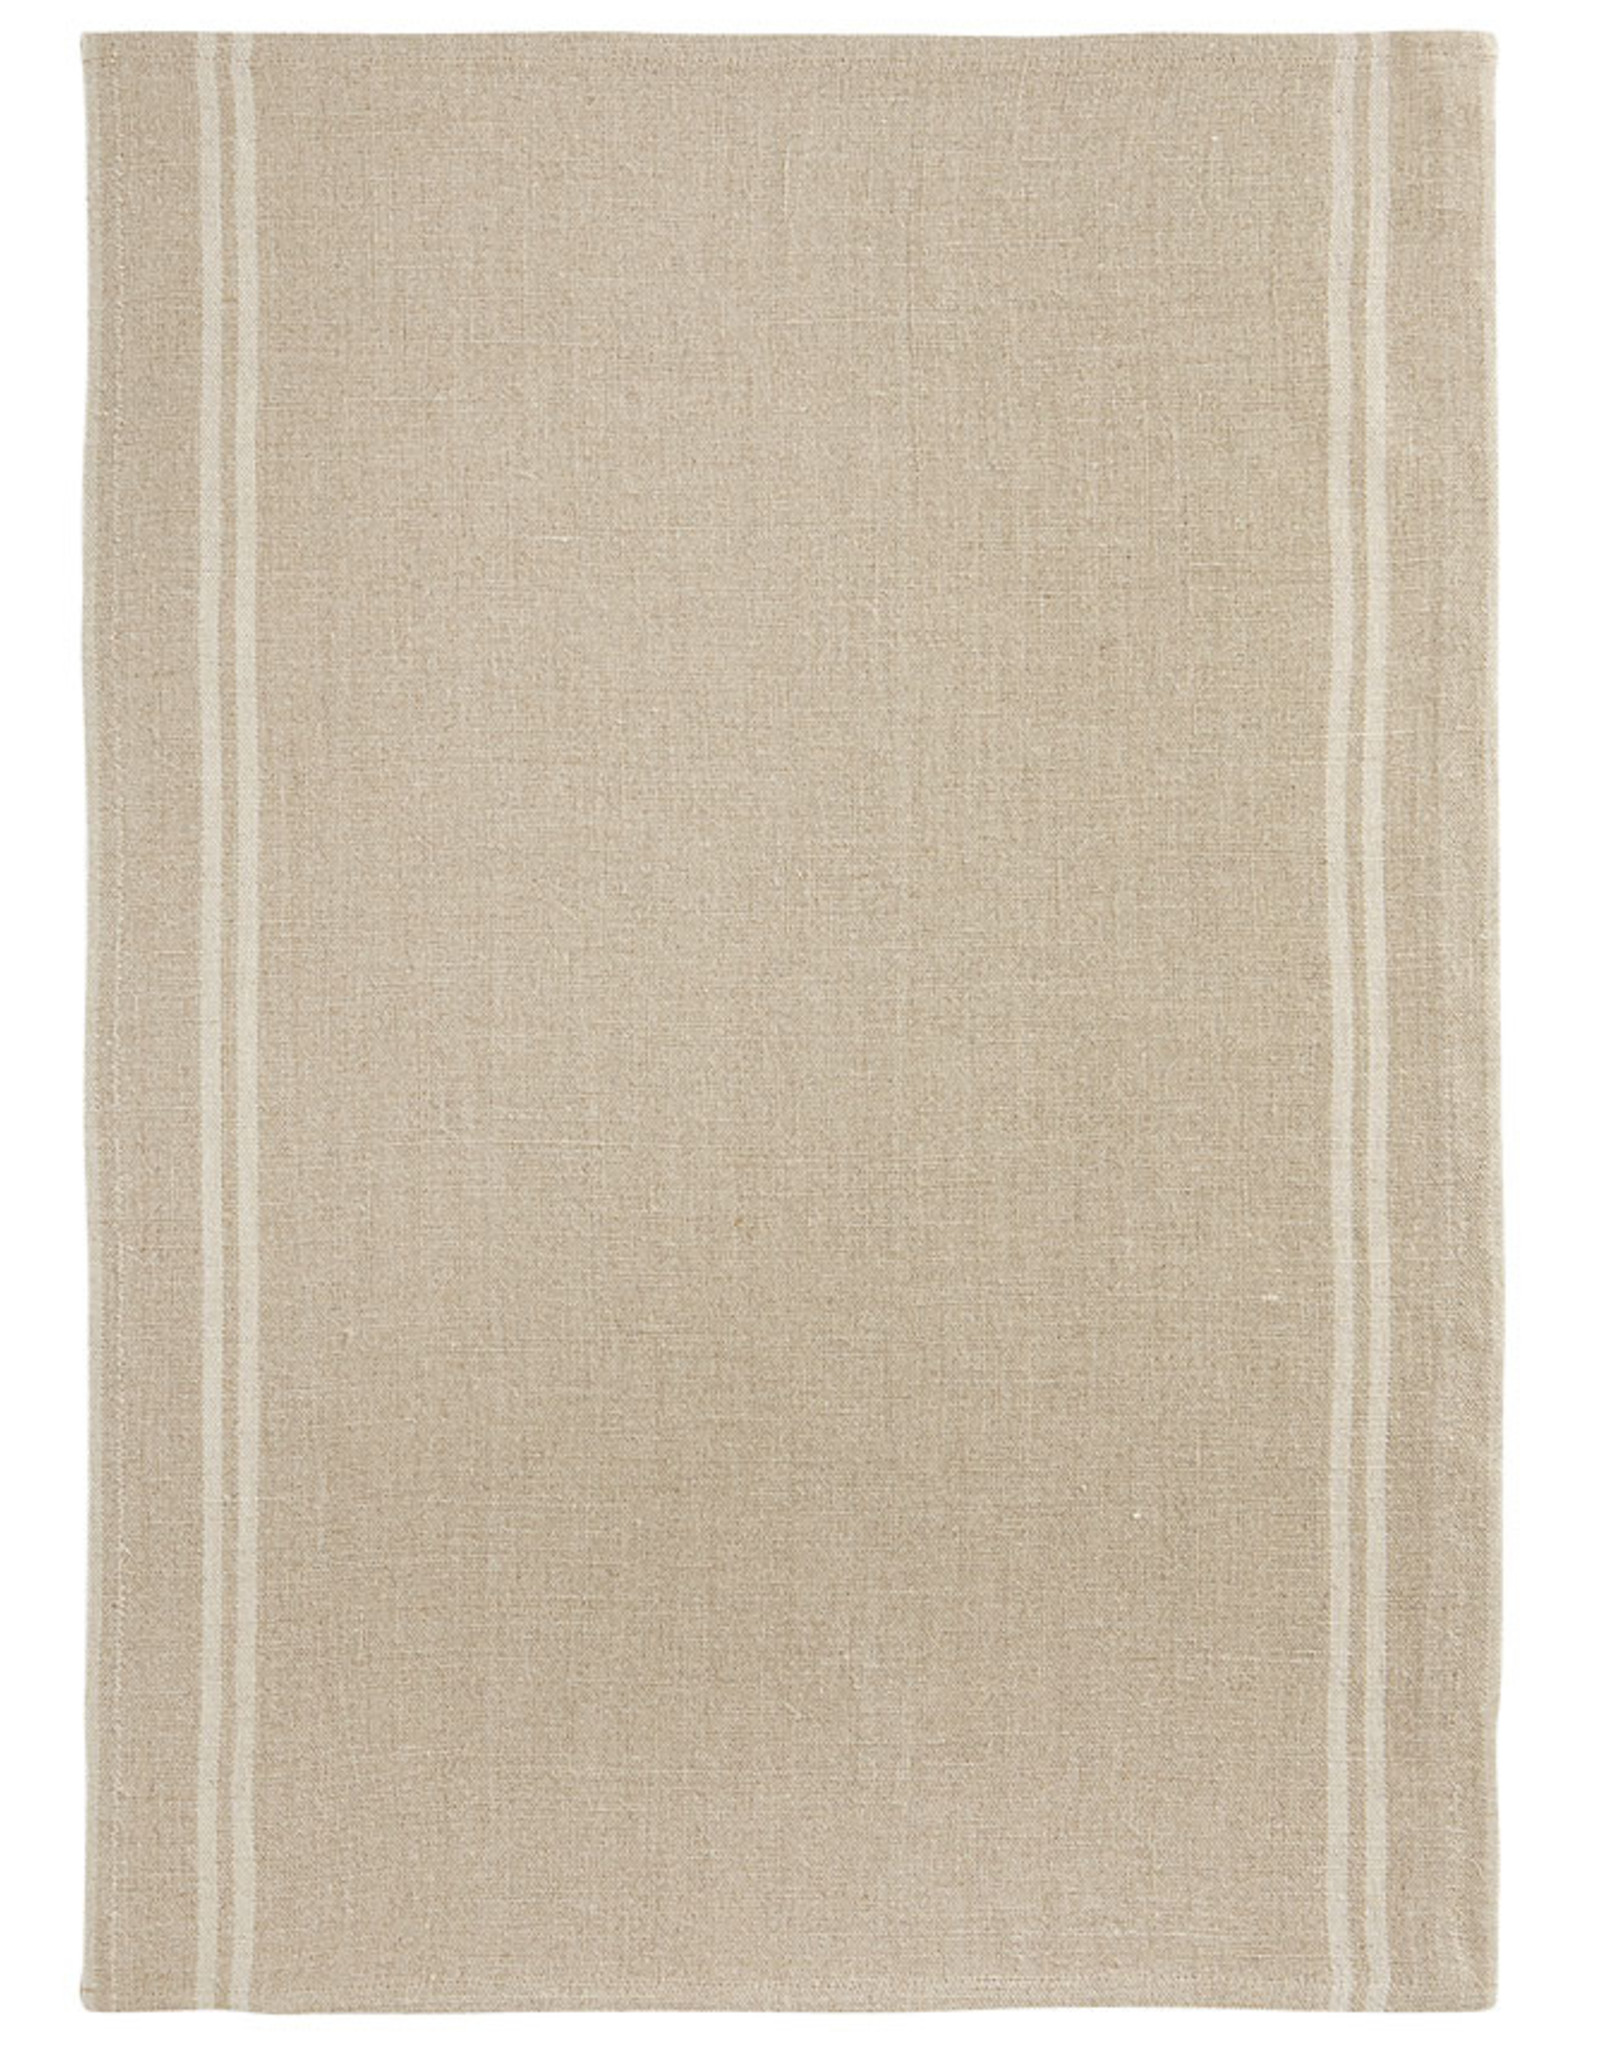 Country Natural with White Stripe Washed Linen Tea Towel